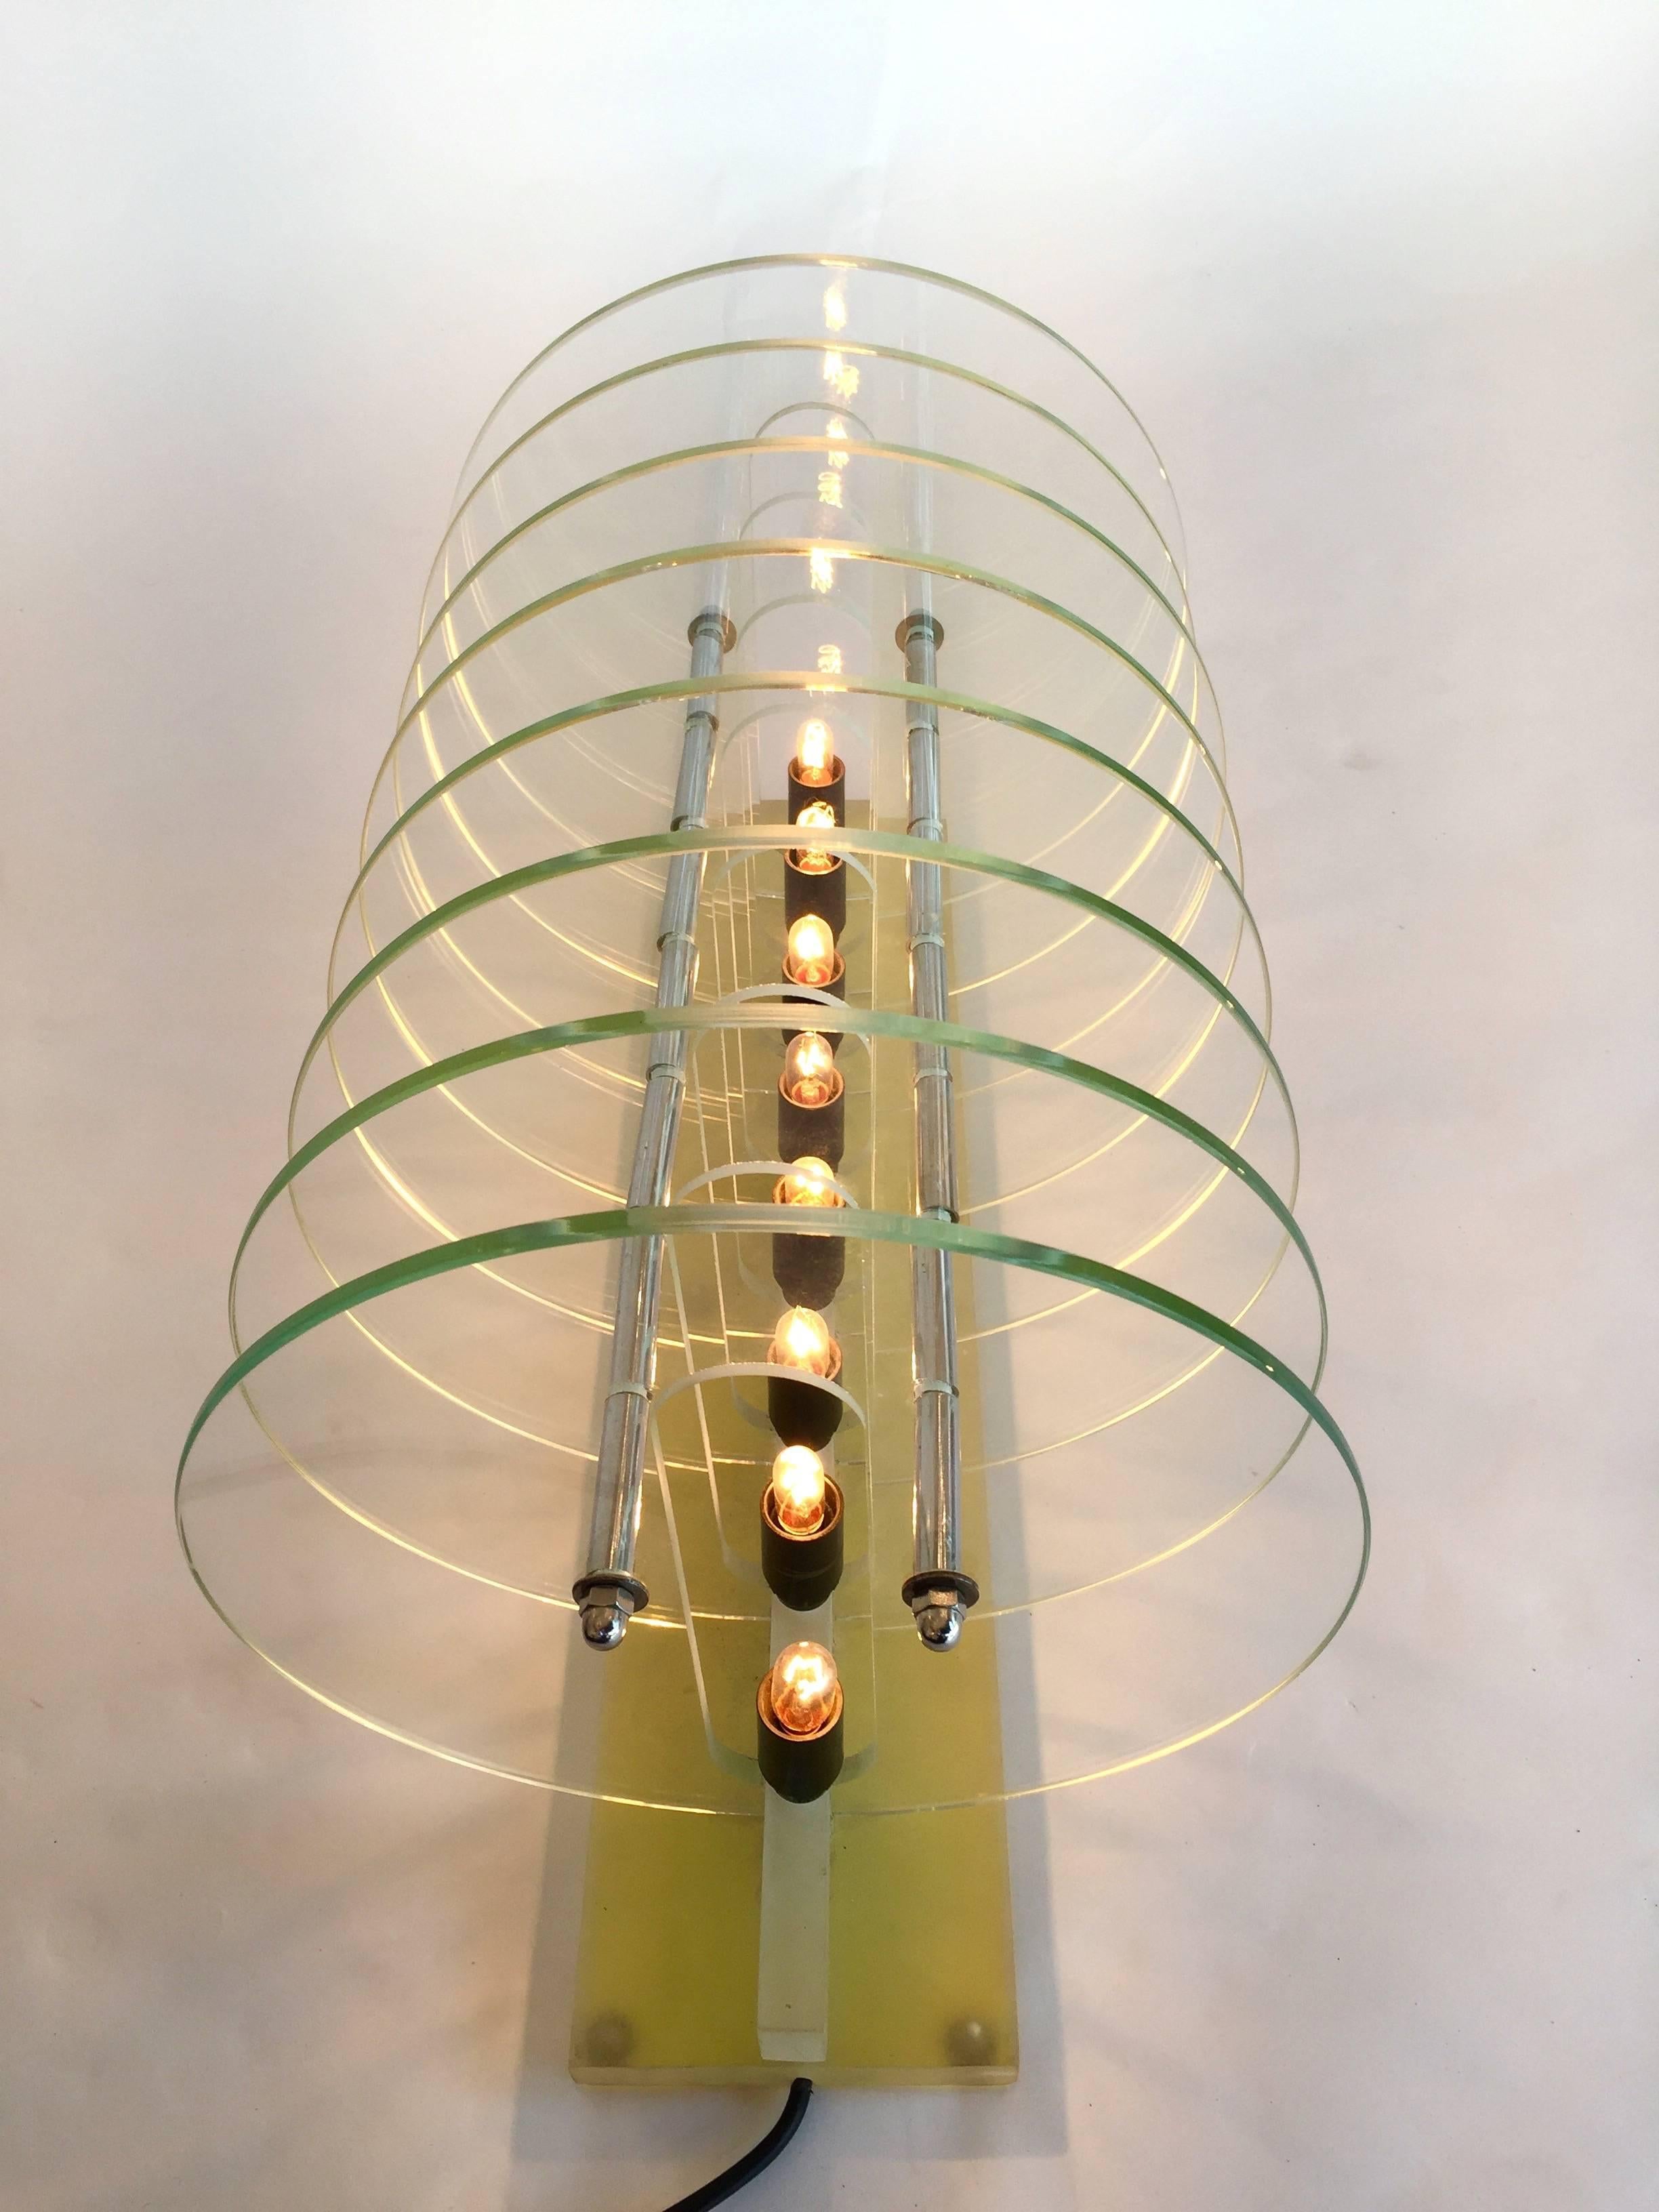 Rare and unusual kinetic or optic table lamp with glass concentric disc and Lucite. Attribute to a small Italian design production close from Memphis, Arditit group, Archizoom style. Really interesting game of light, light extend to infinity.